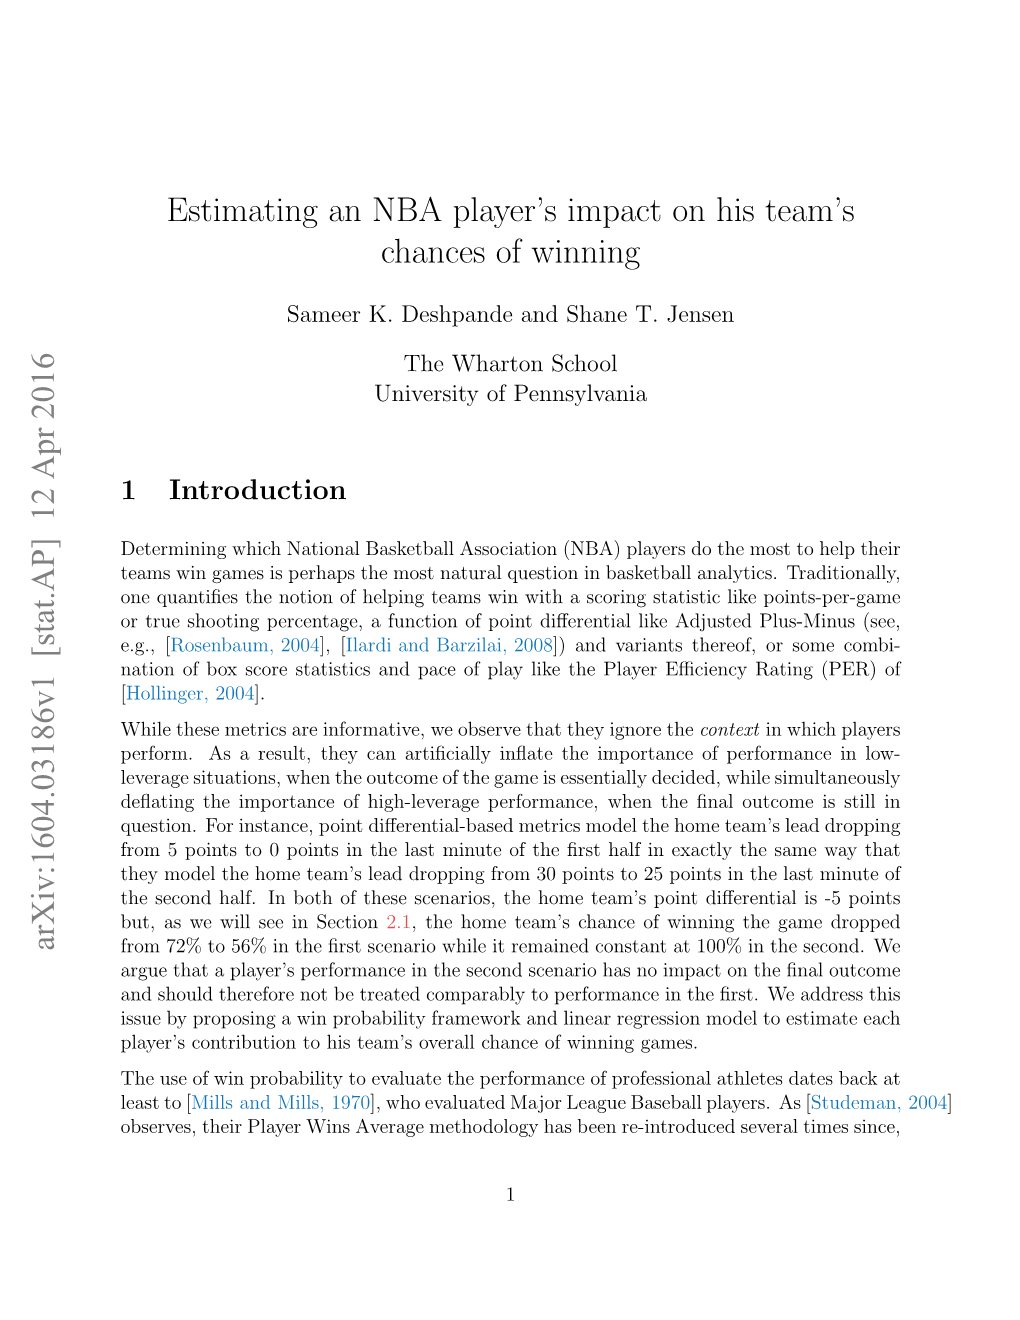 Estimating an NBA Player's Impact on His Team's Chances of Winning Arxiv